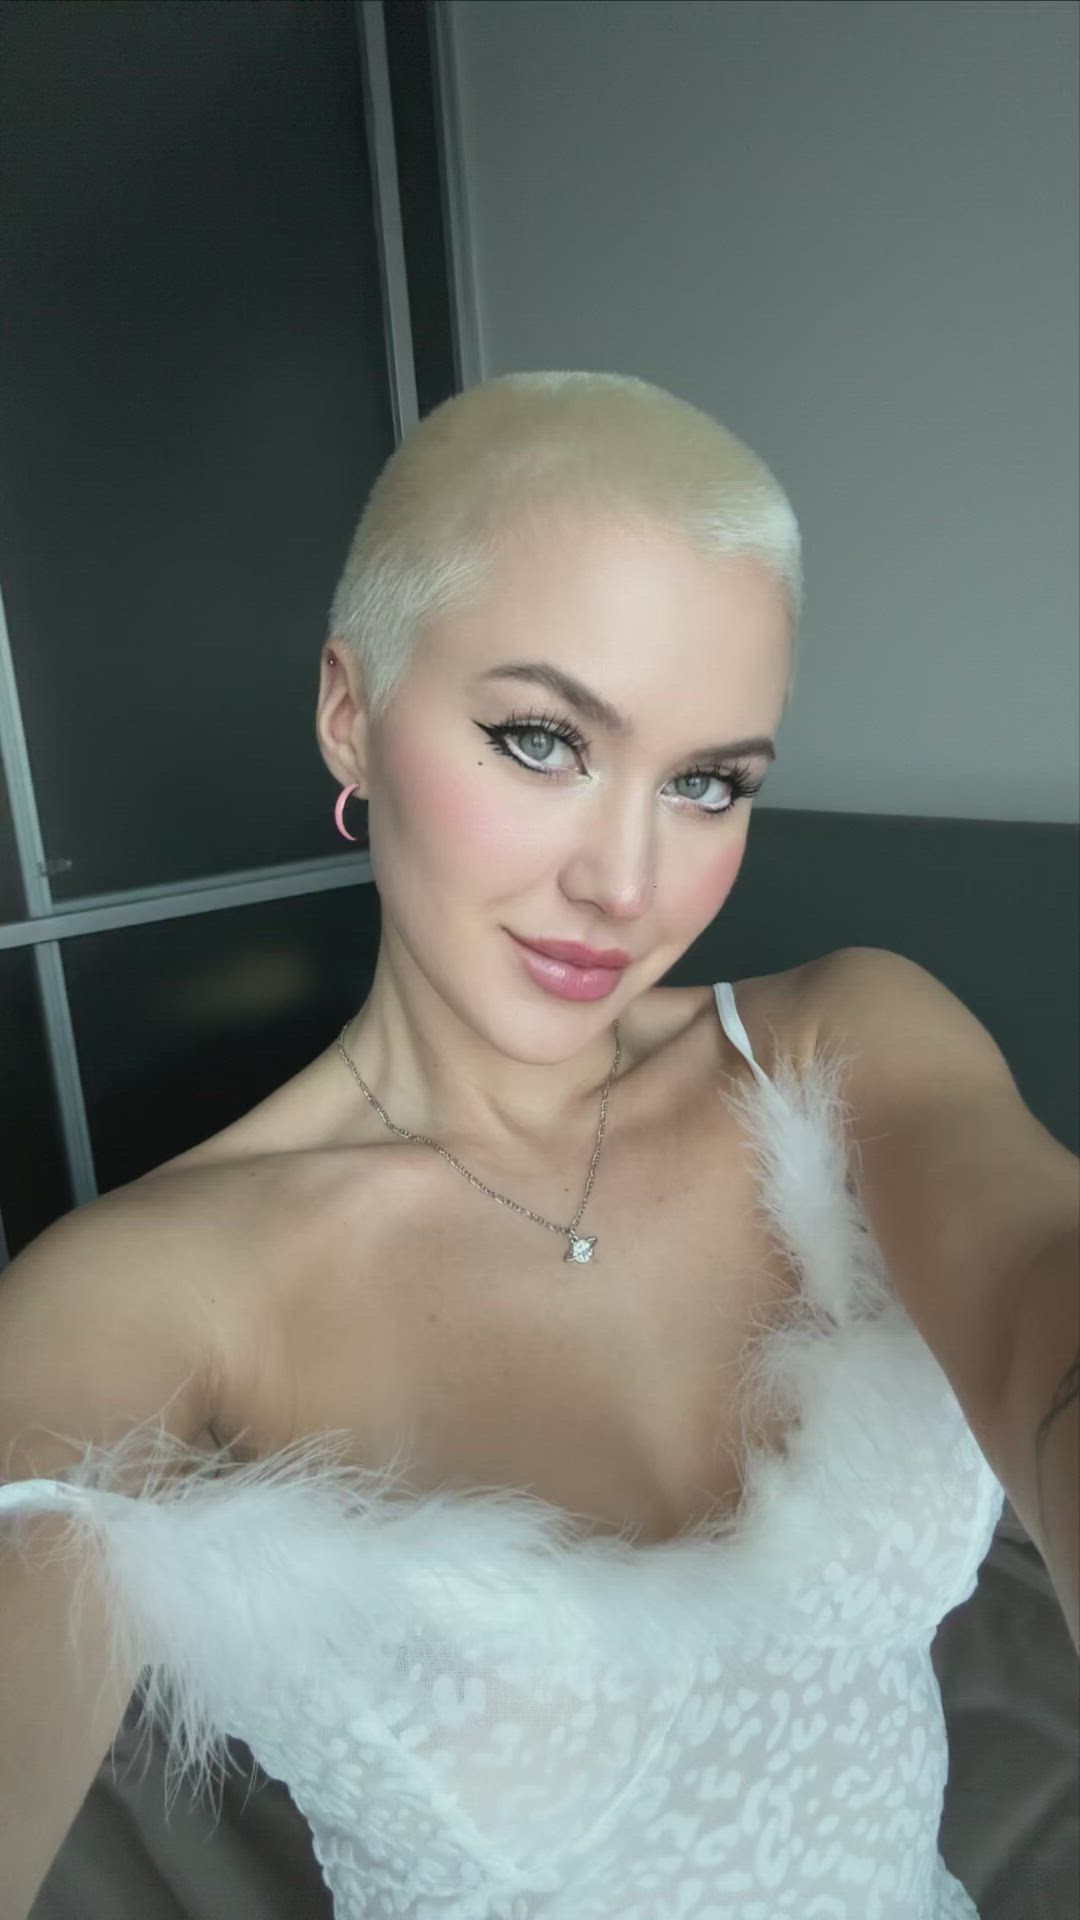 Big Tits porn video with onlyfans model lunaohmy <strong>@ohmy_luna</strong>